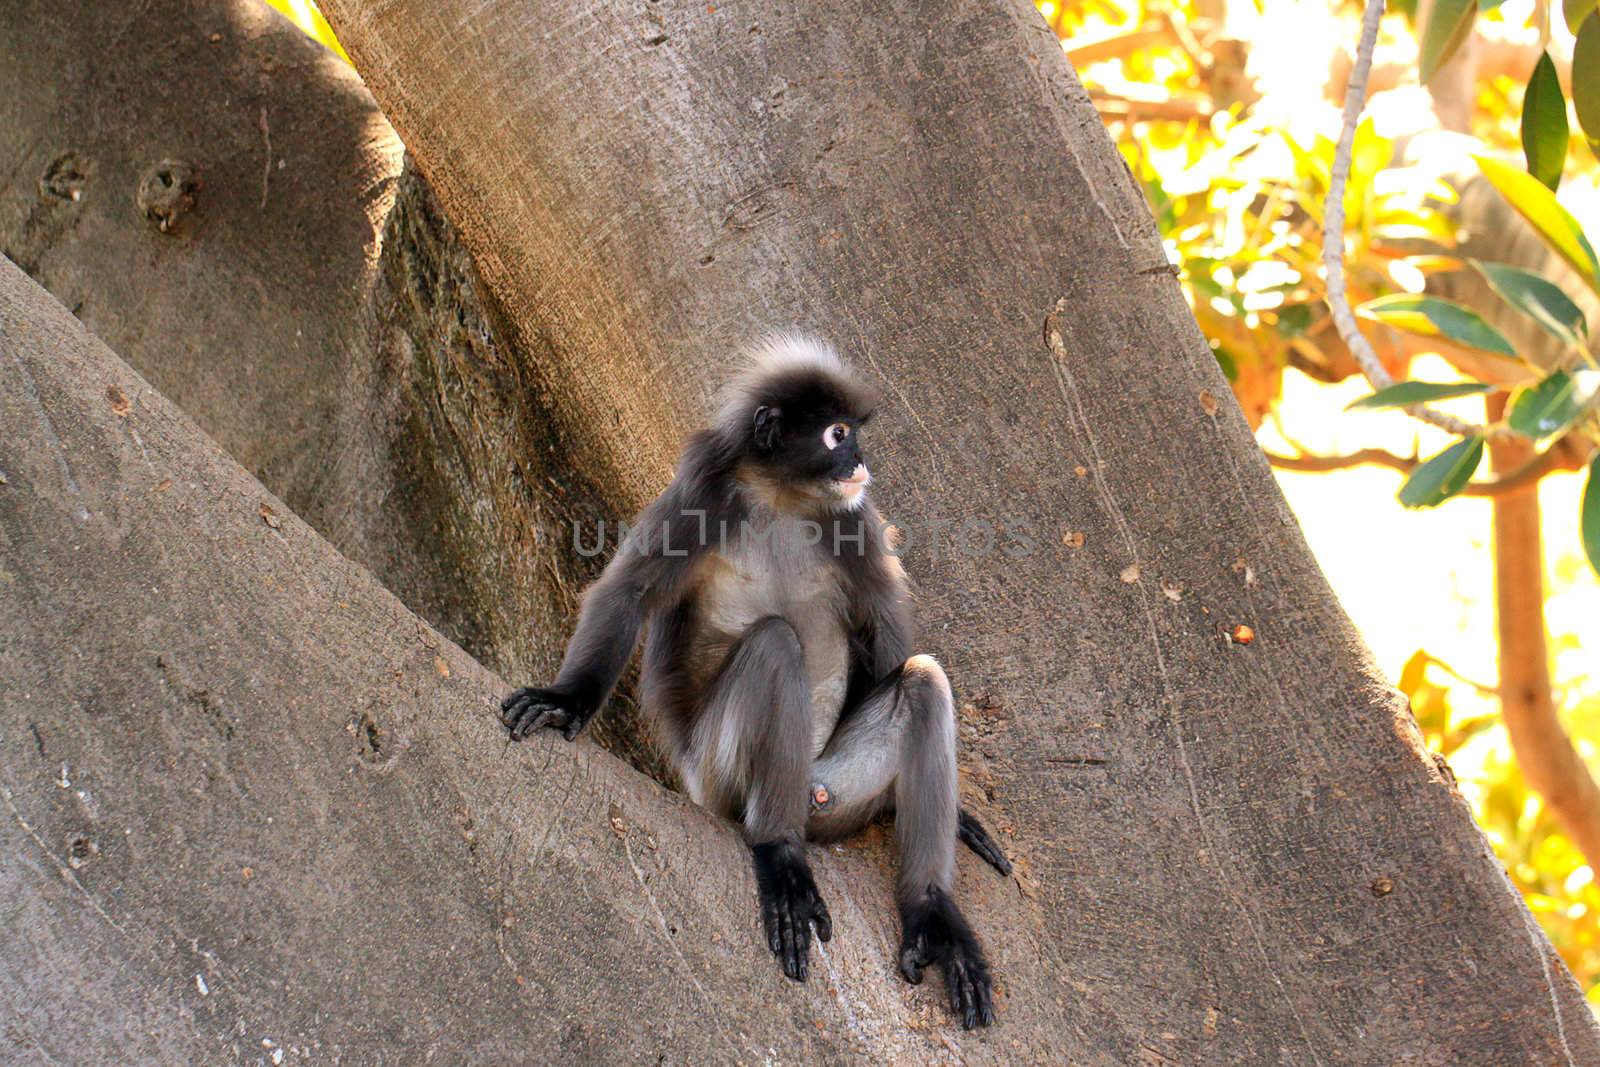 Dusky Leaf Monkey - Semnopithecus obscurus - sitting in a Morton by Cloudia